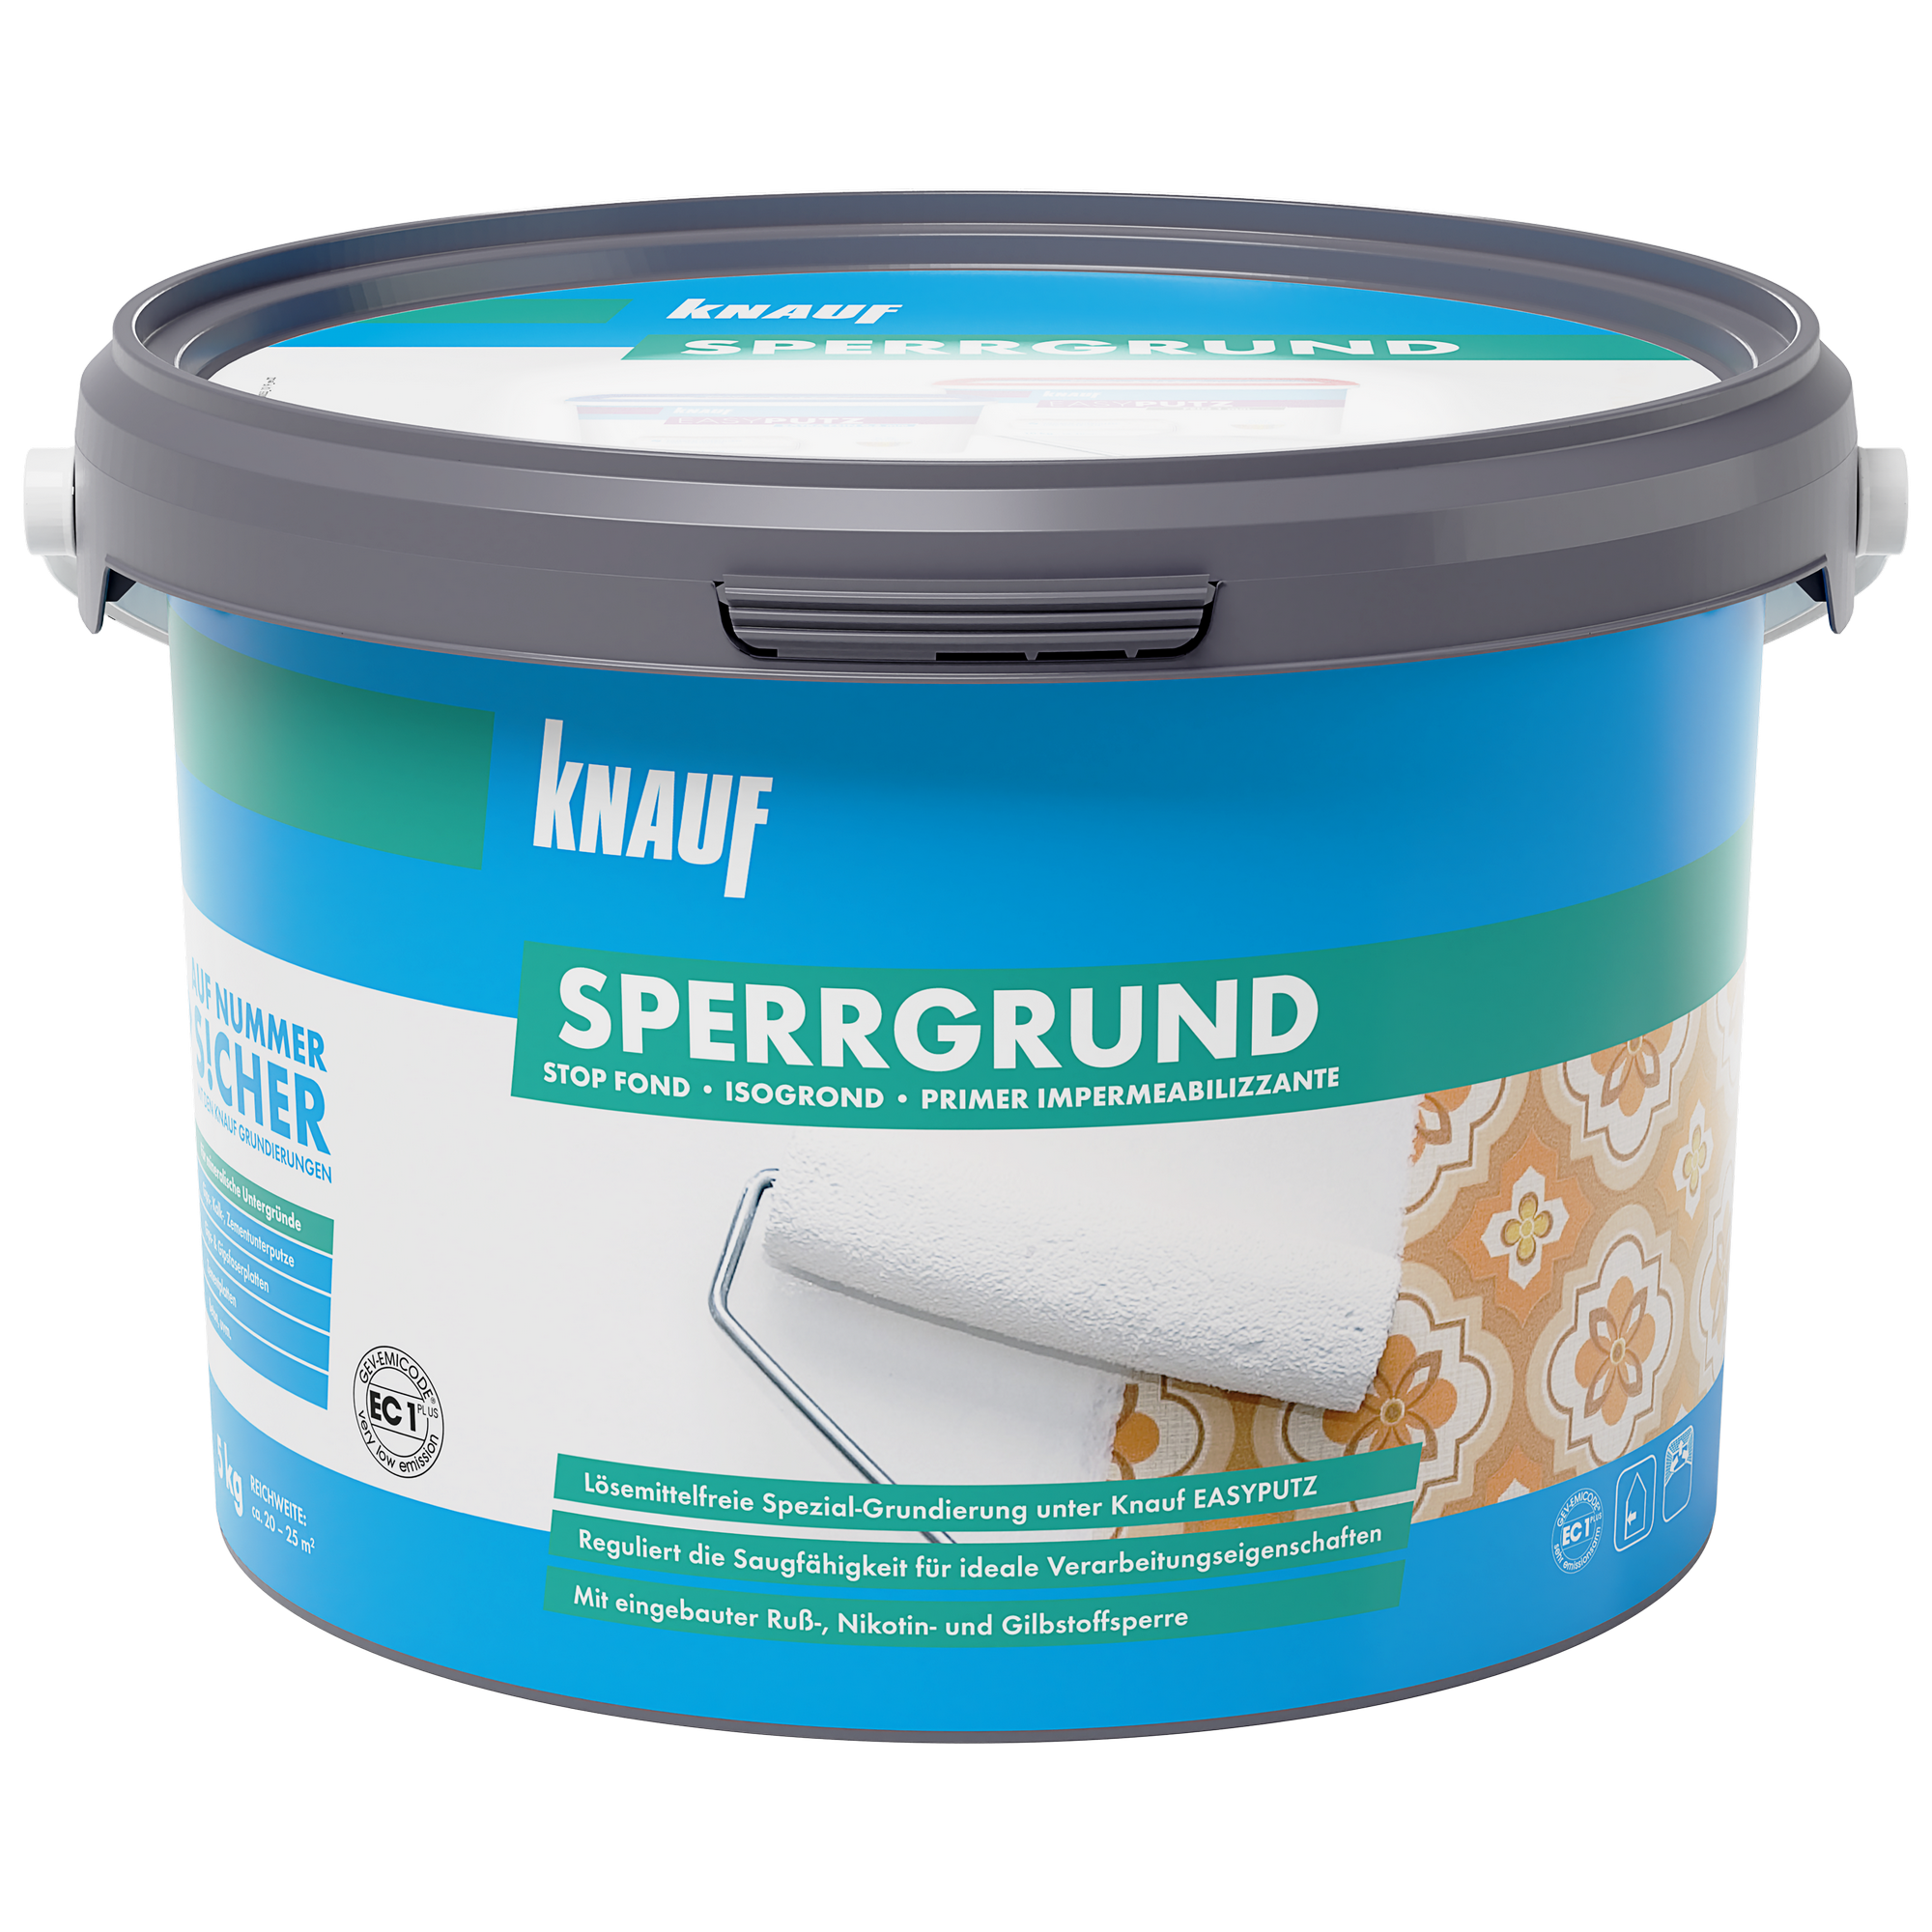 Sperrgrund 5 kg + product picture